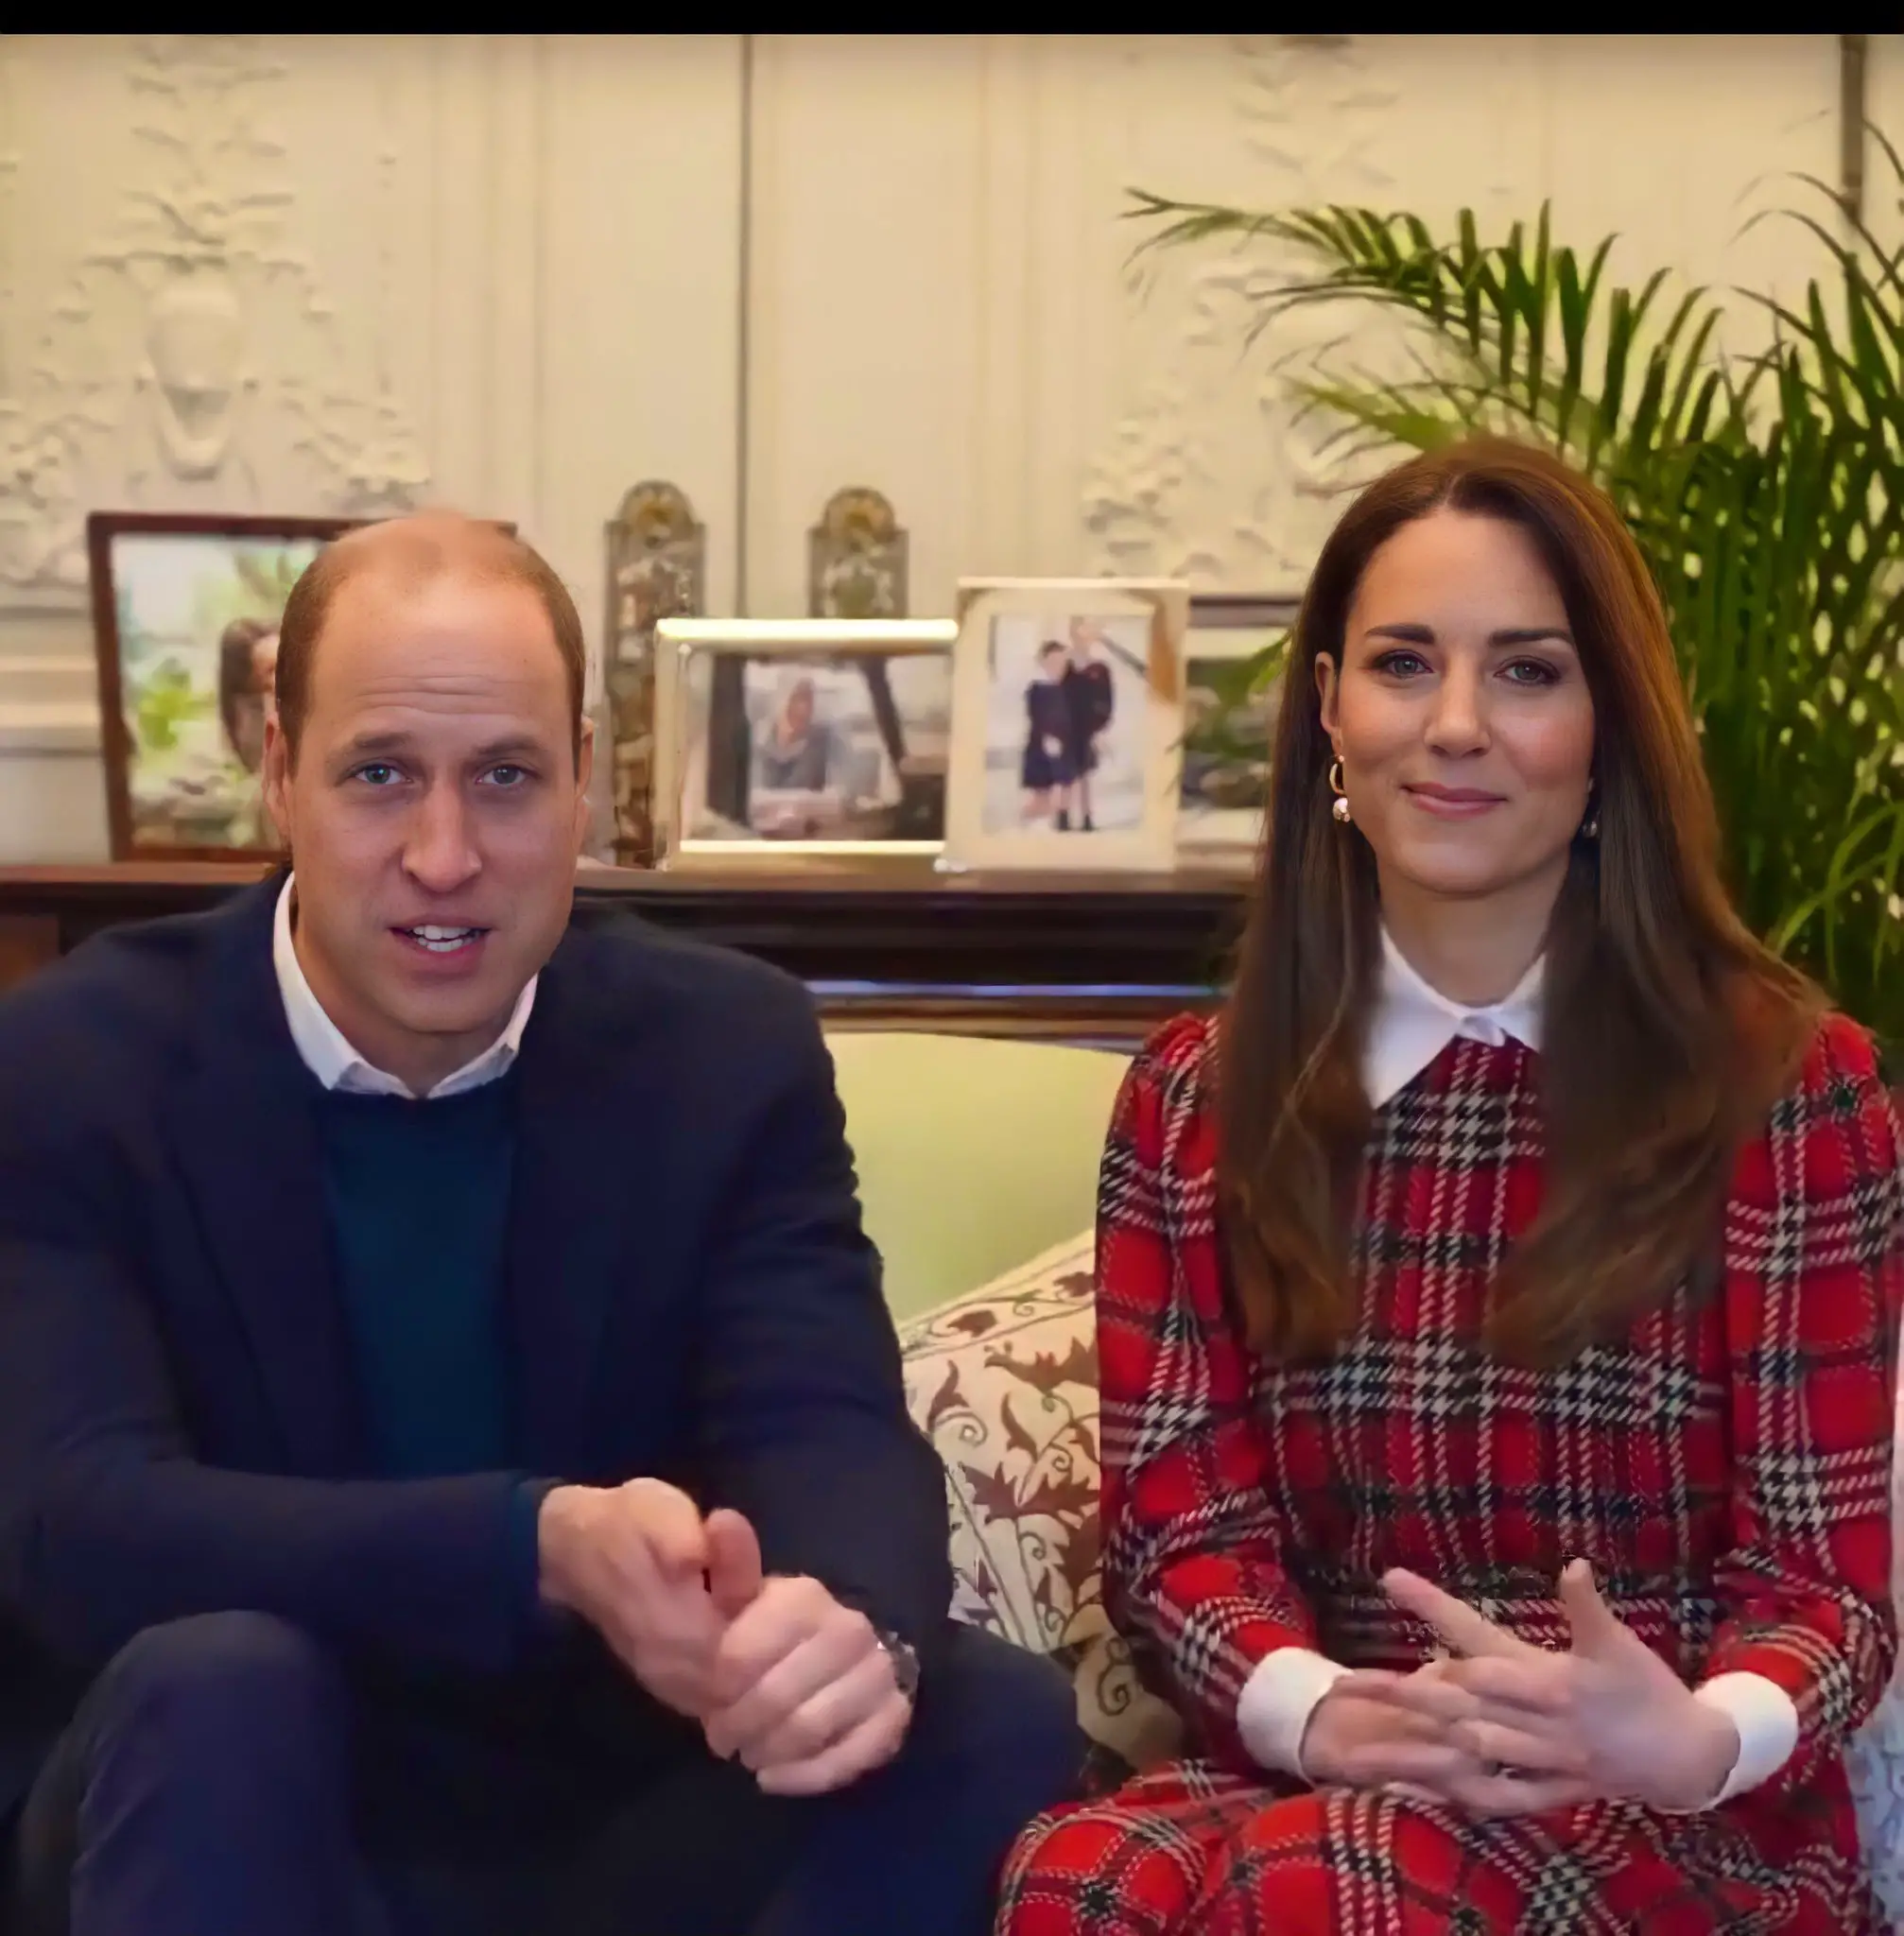 The Duke and Duchess of Cambridge sent a Video message to NHS frontline woerks on Burns Night